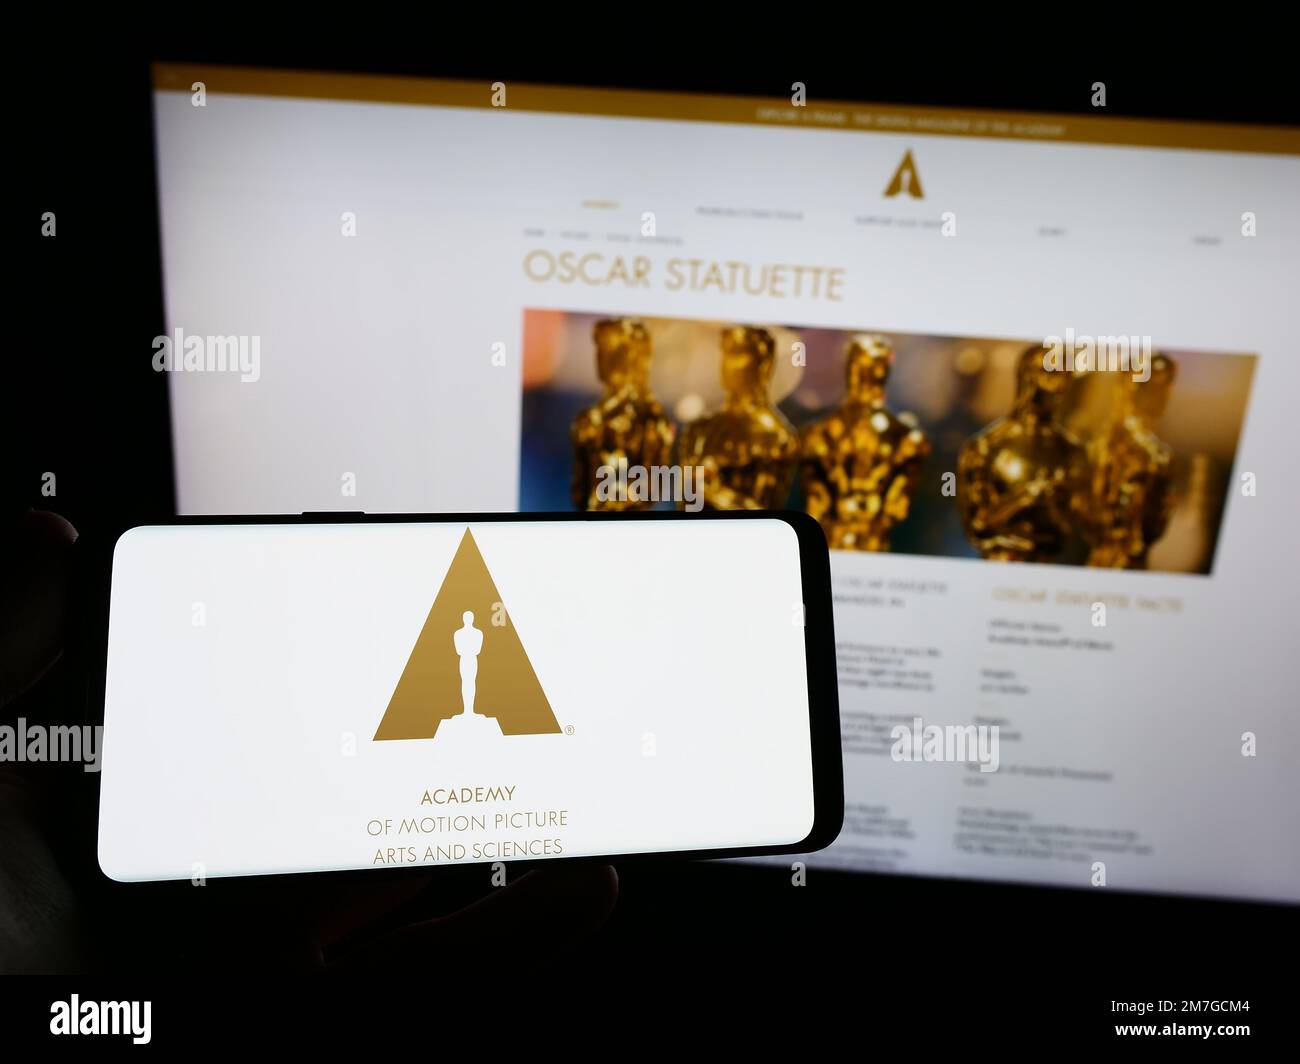 Person holding smartphone with logo of Academy of Motion Picture Arts and Sciences (AMPAS) on screen in front of website. Focus on phone display. Stock Photo